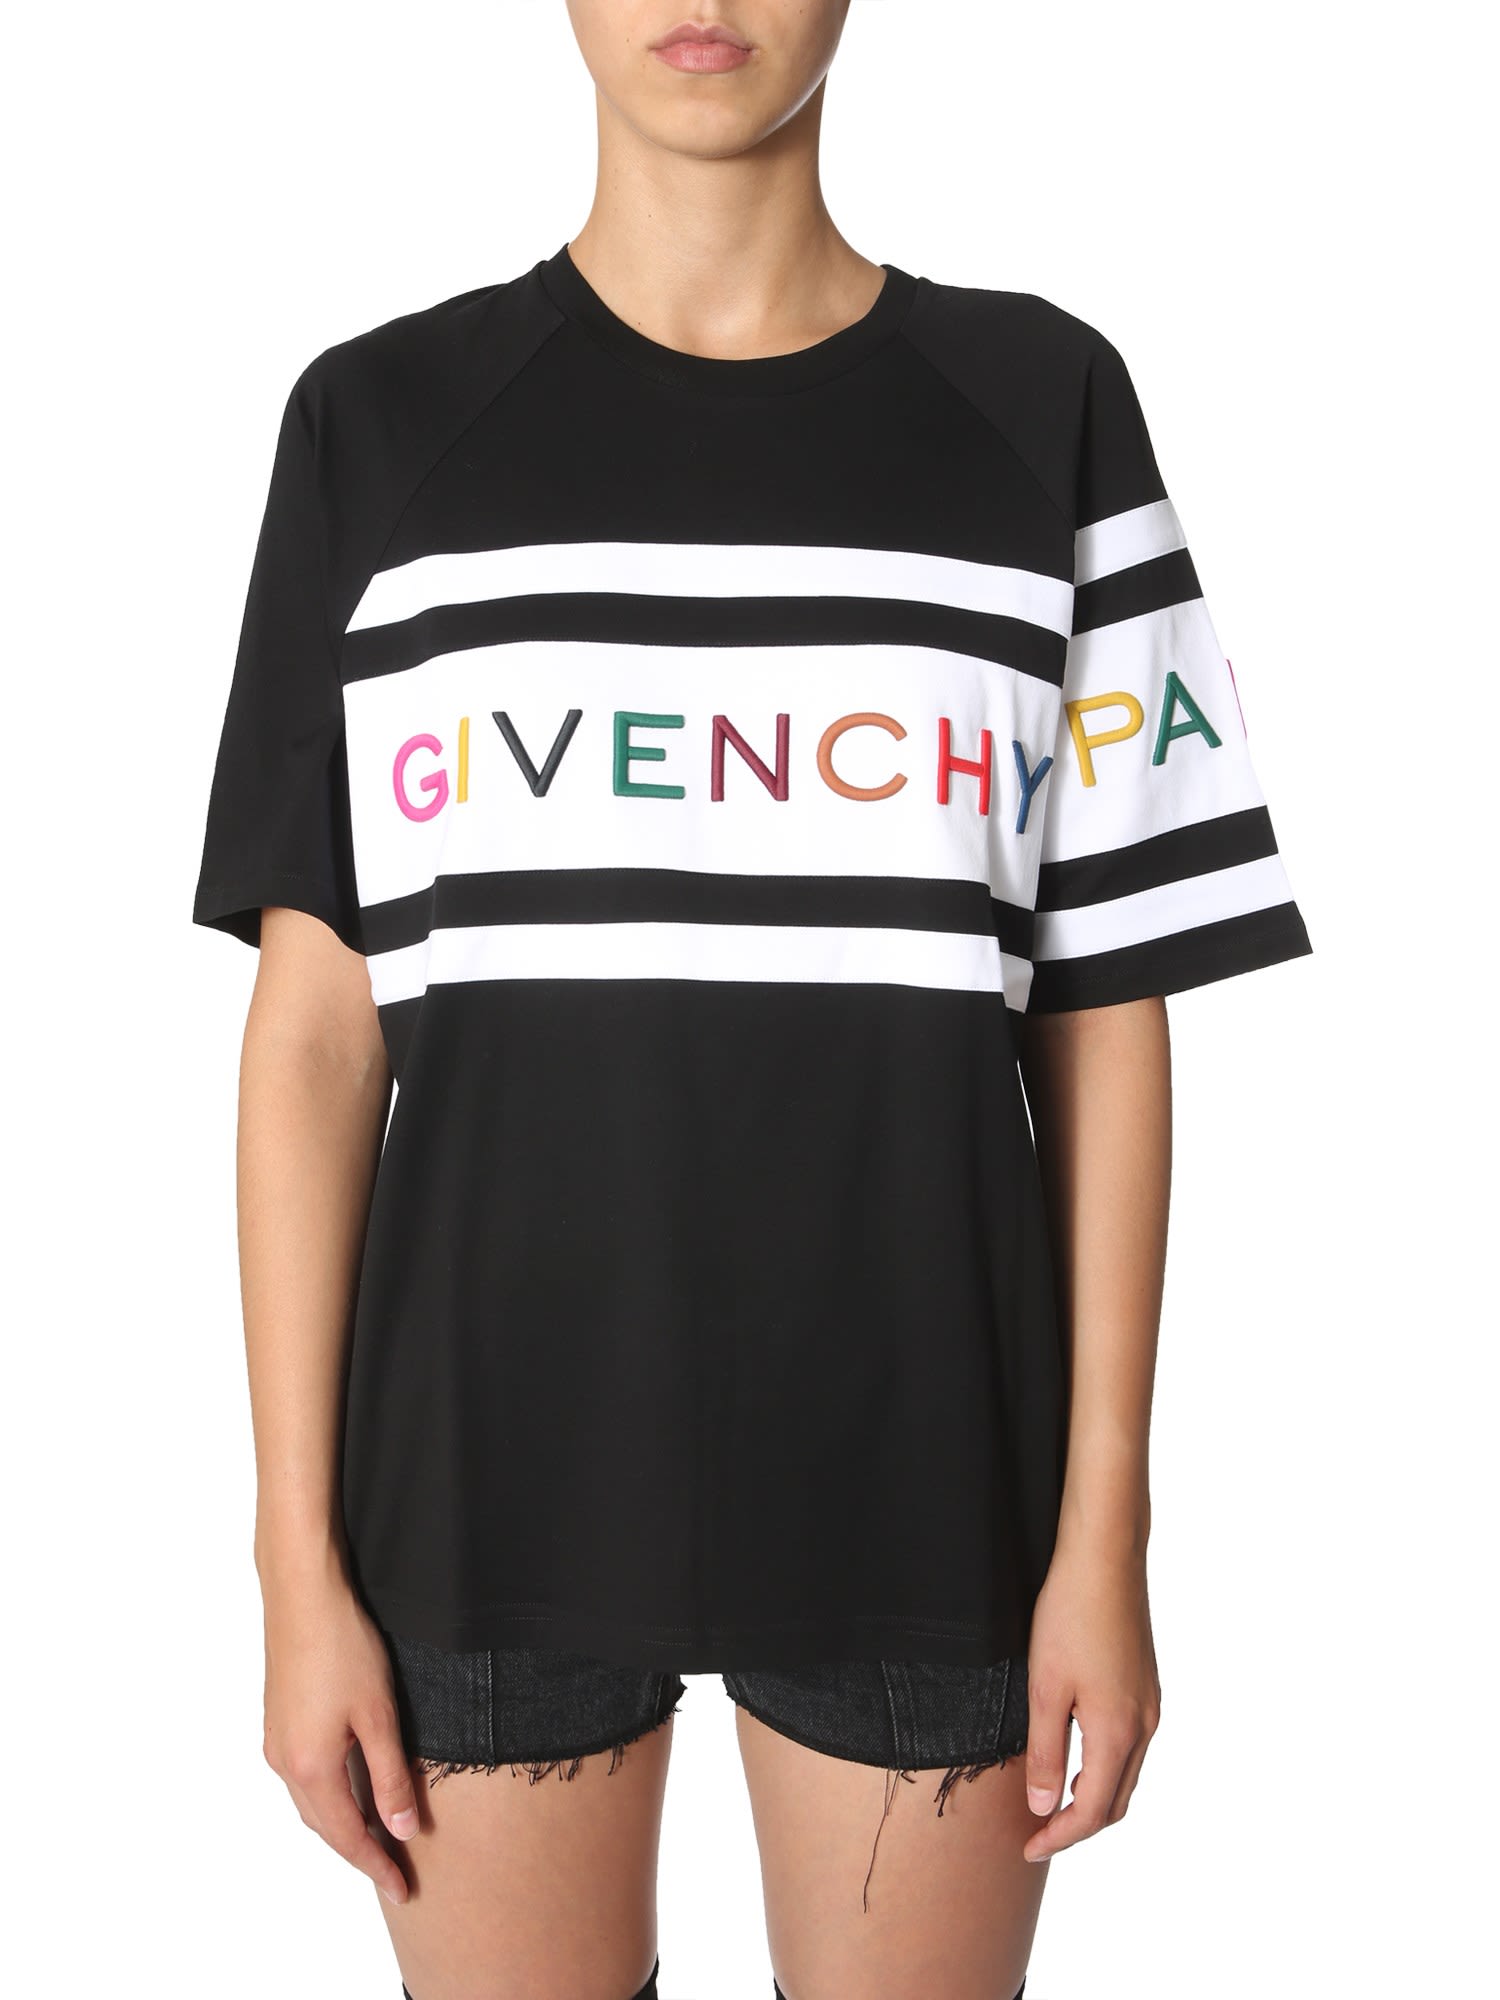 GIVENCHY T-SHIRT WITH EMBROIDERED LOGO,10991605